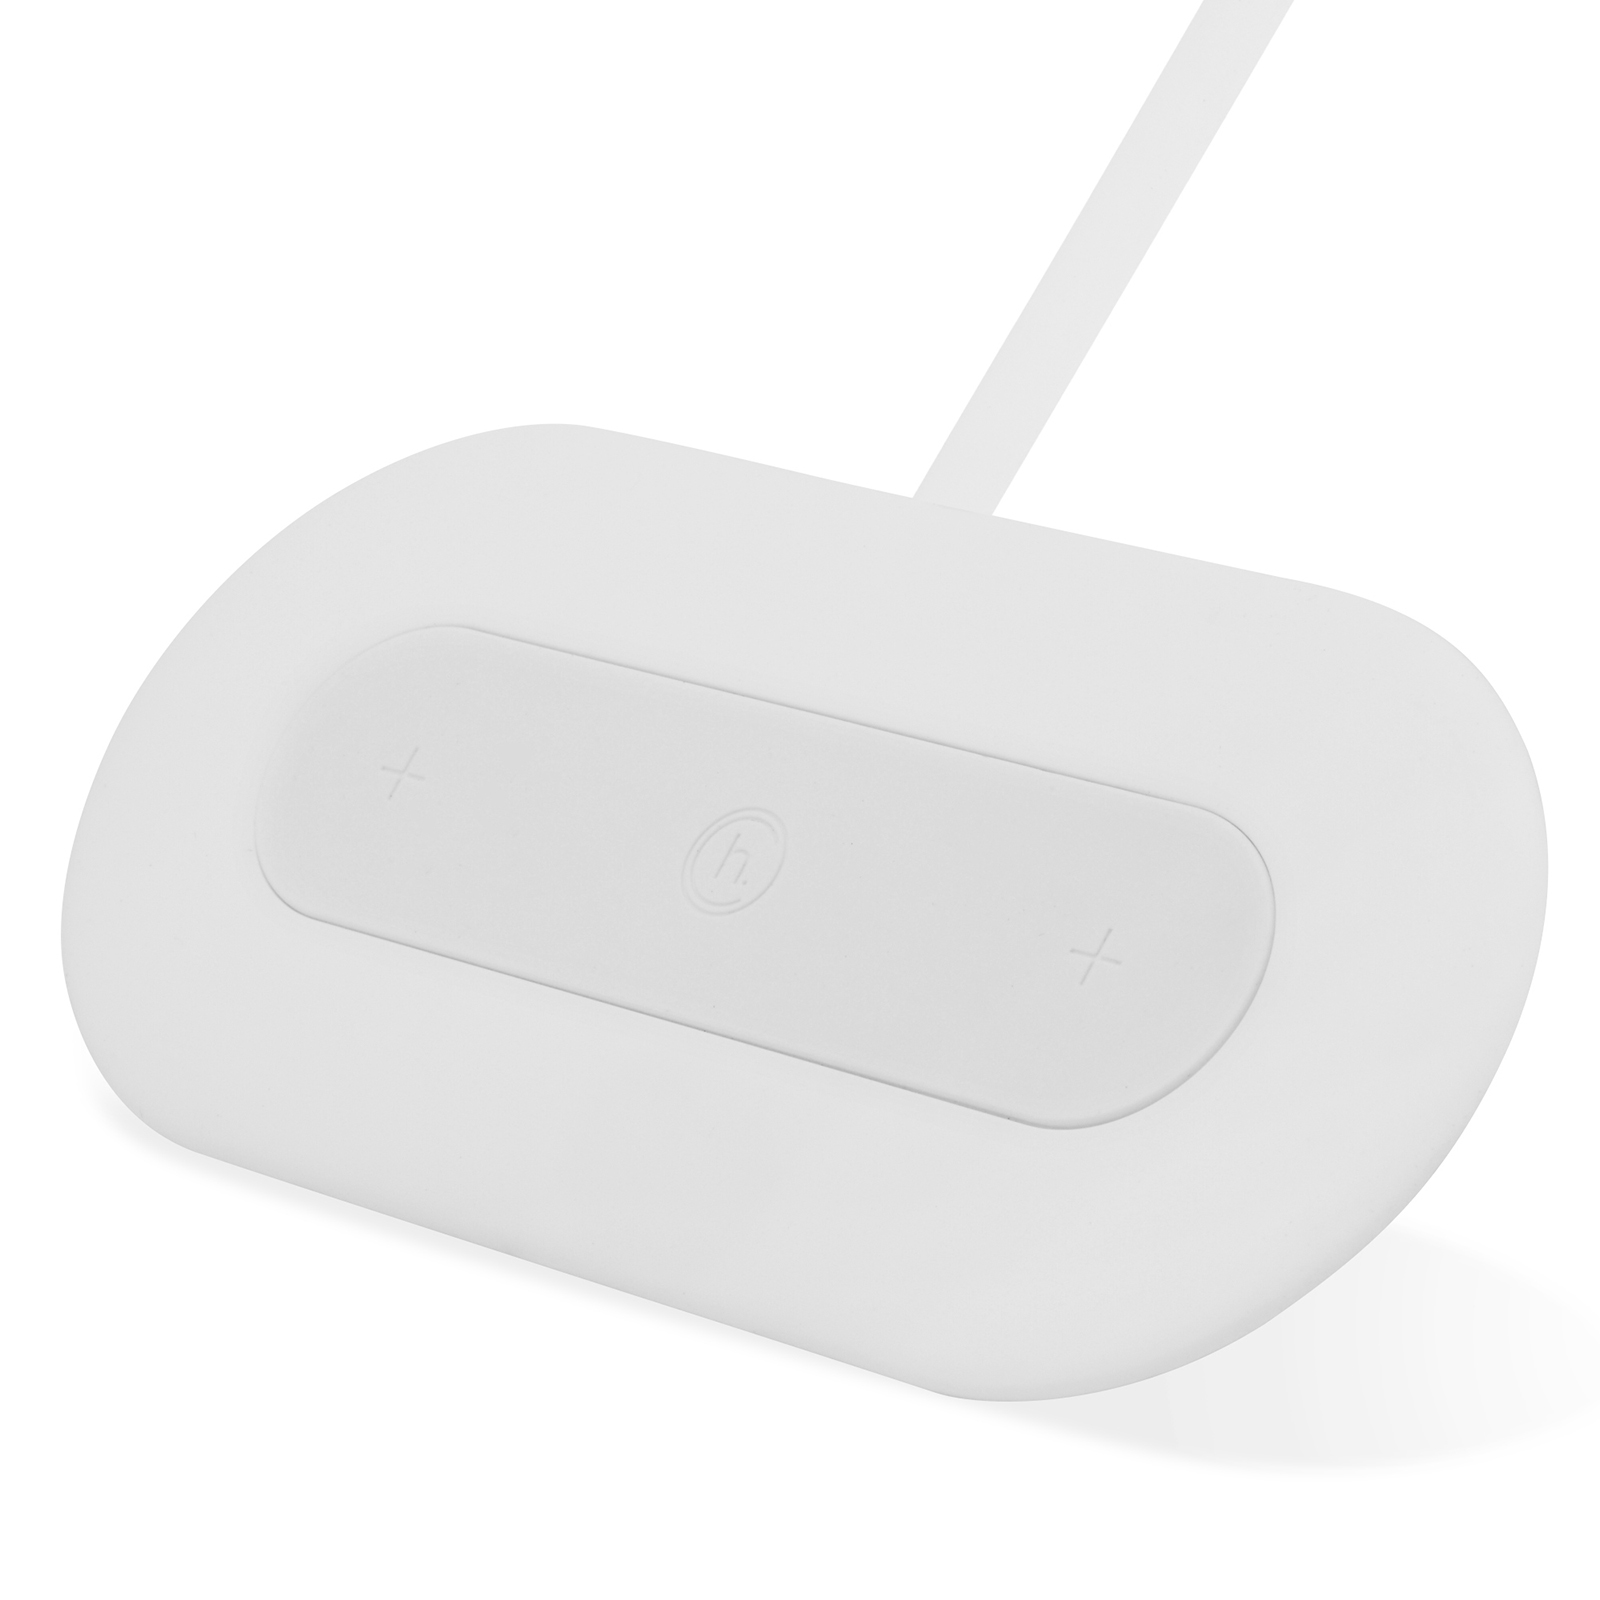 Wireless charger, double qi fast charge pad modena, white